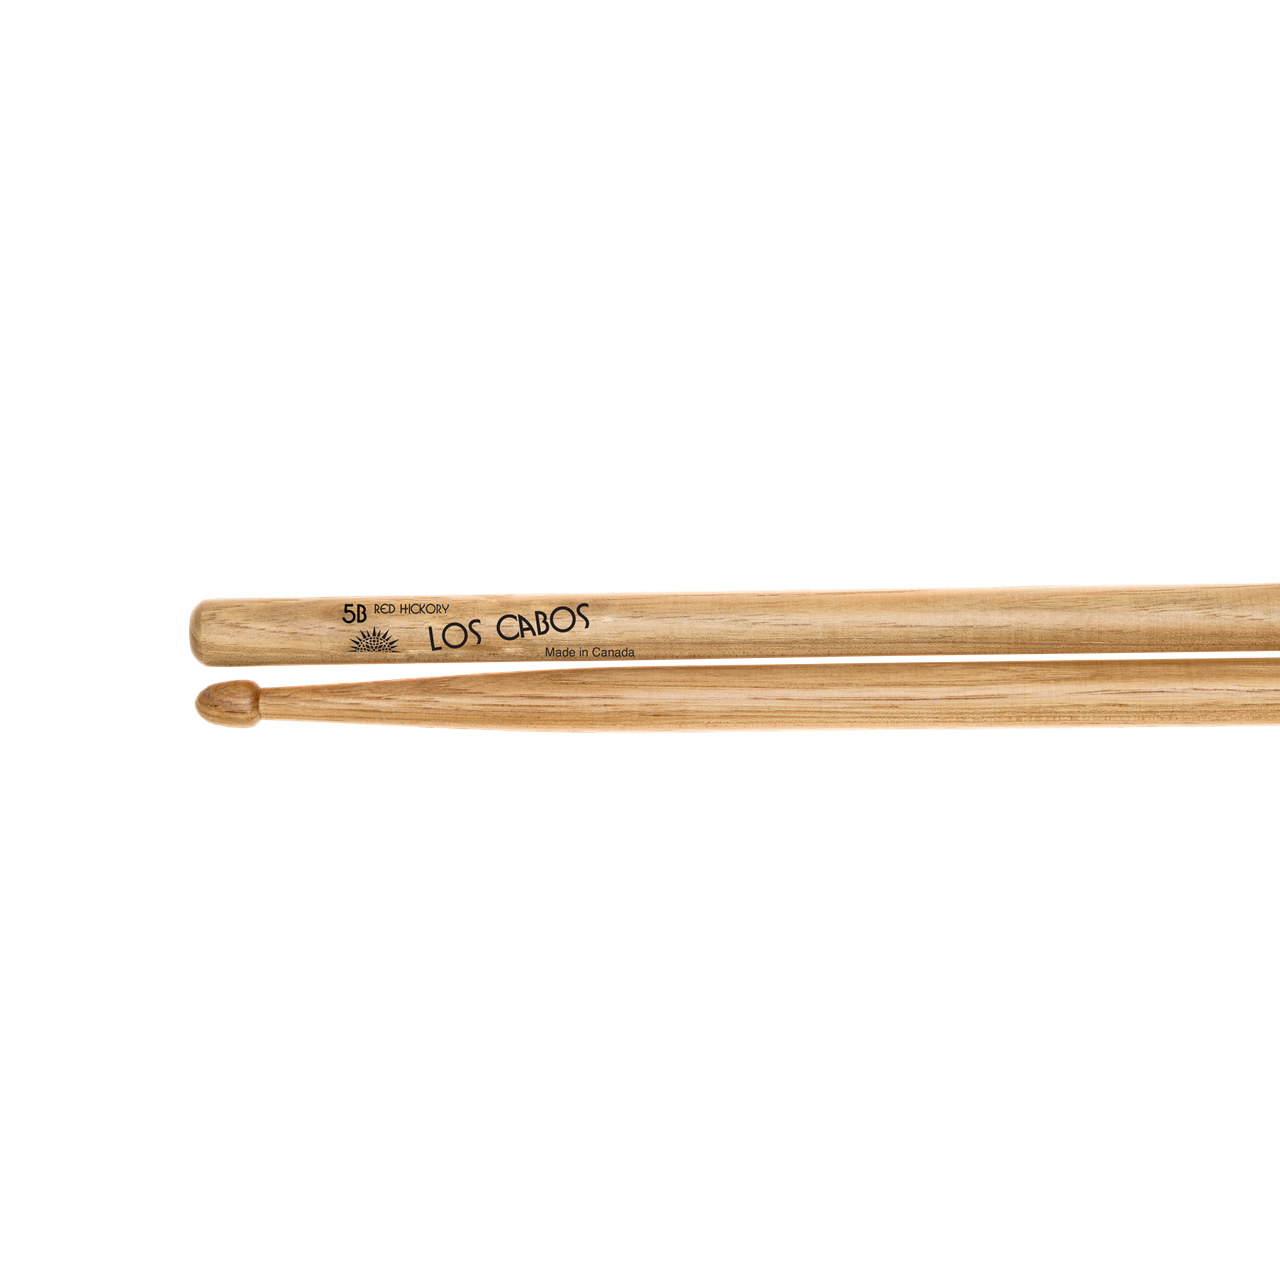 Los Cabos Drumstick 5B Red Hickory